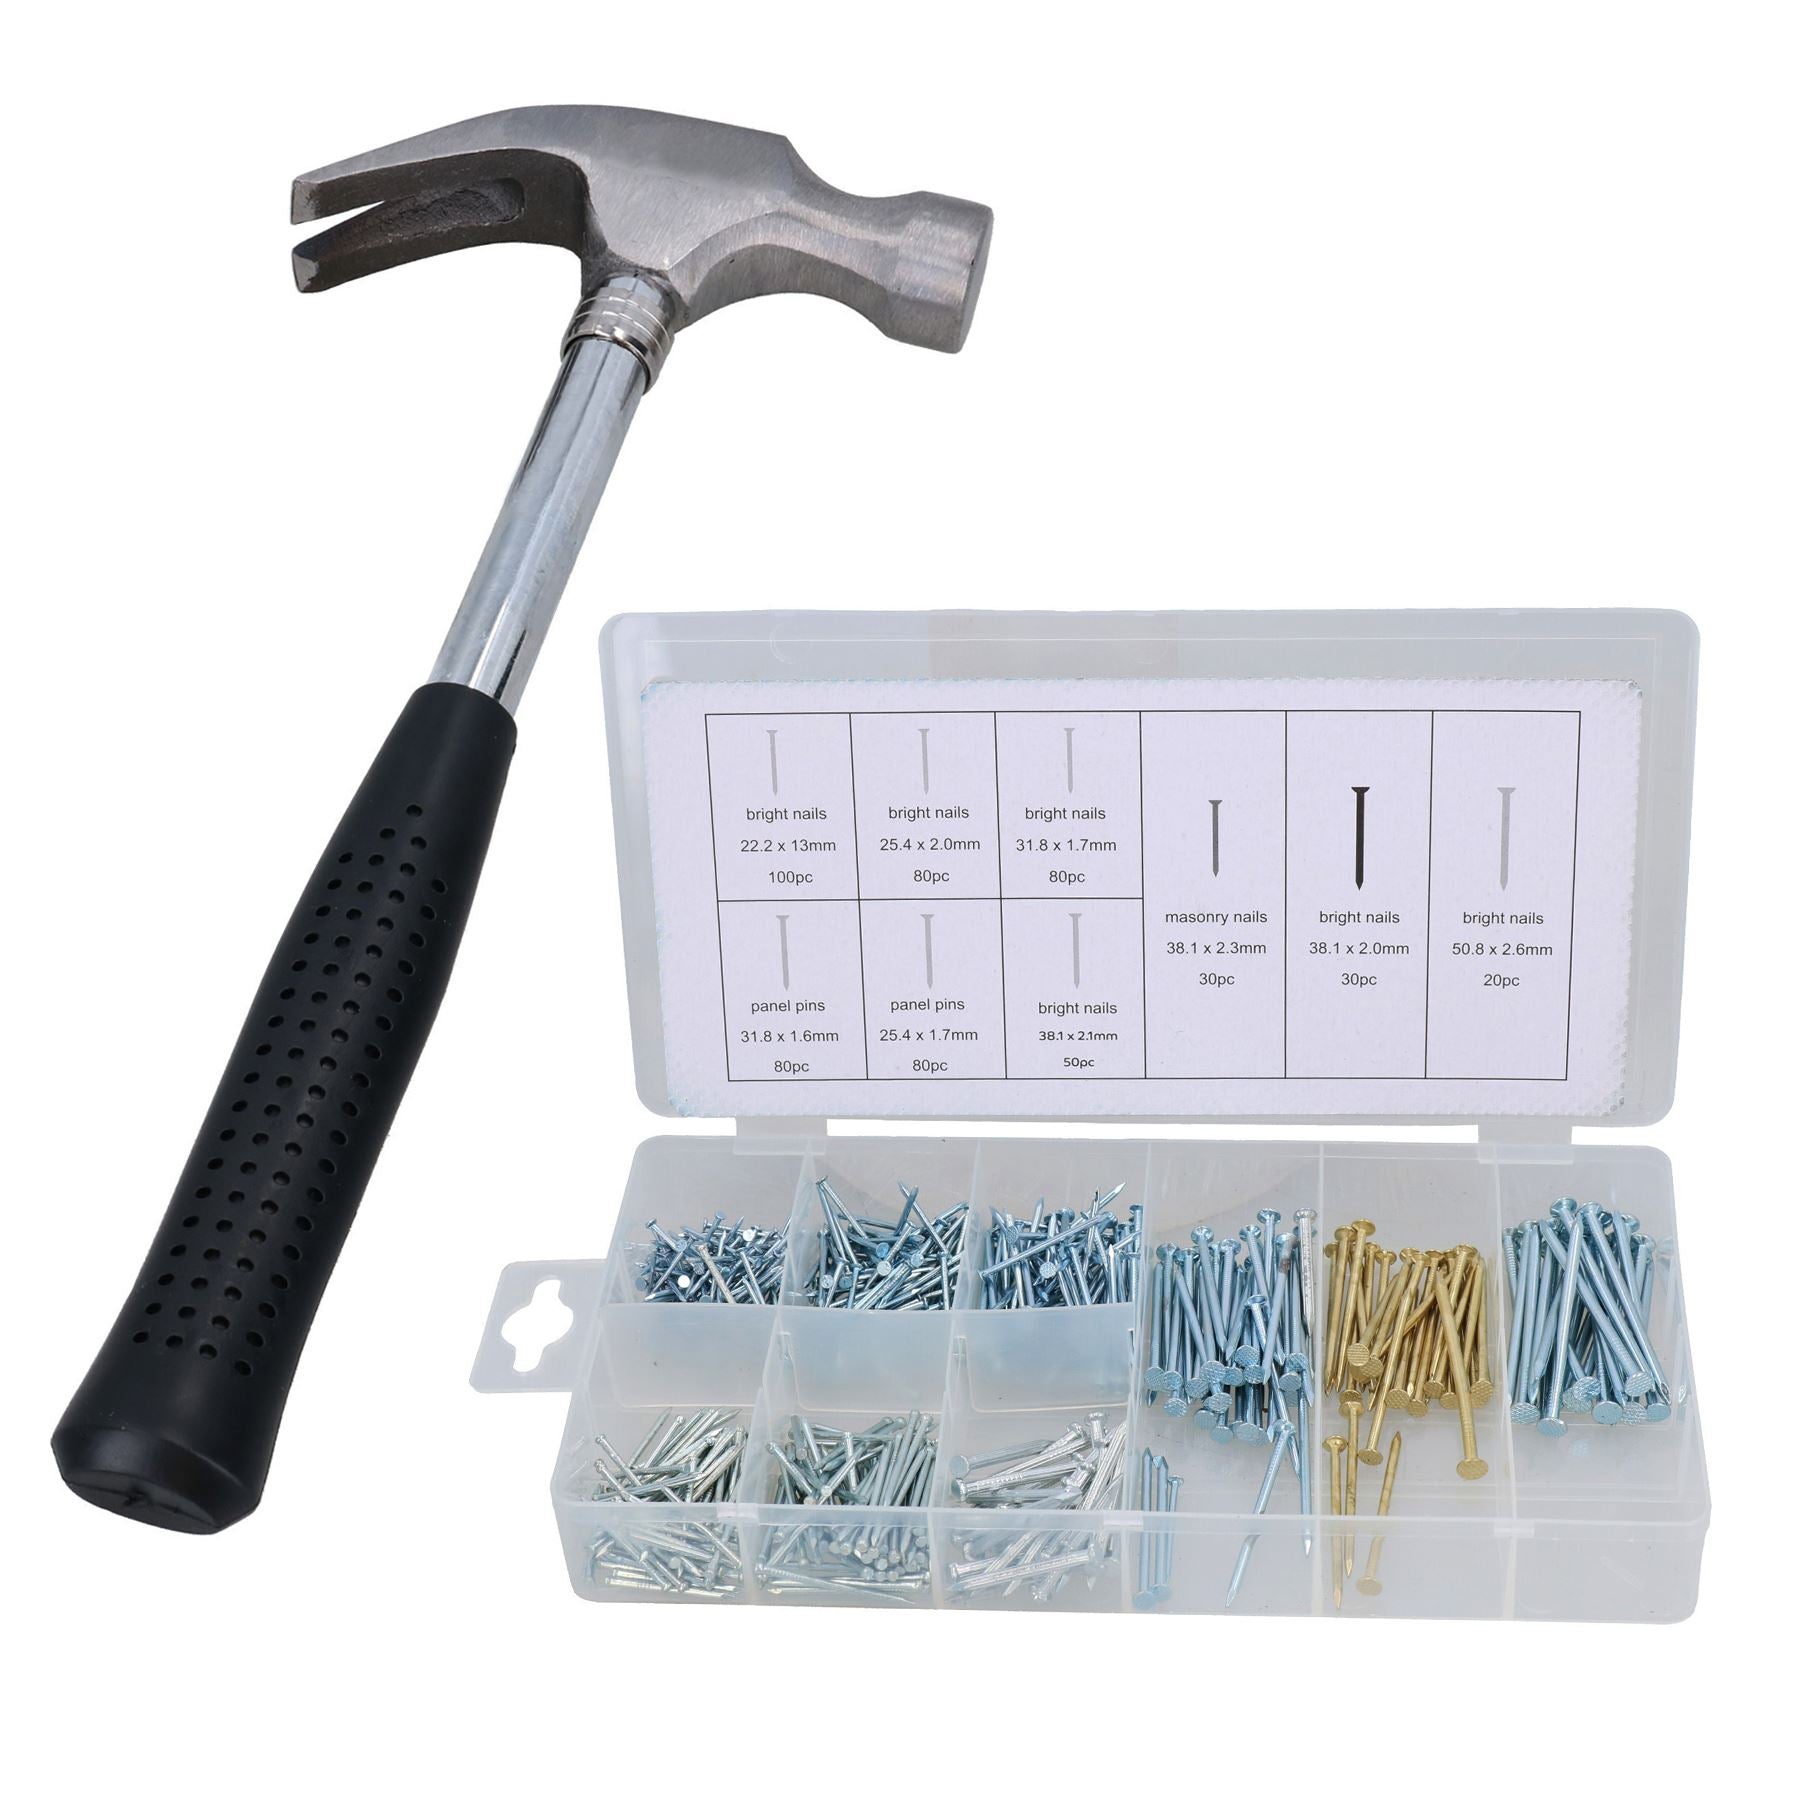 8oz Claw Hammer Nail Remover Installer 10” Long With 550pc Nail Assortment Set